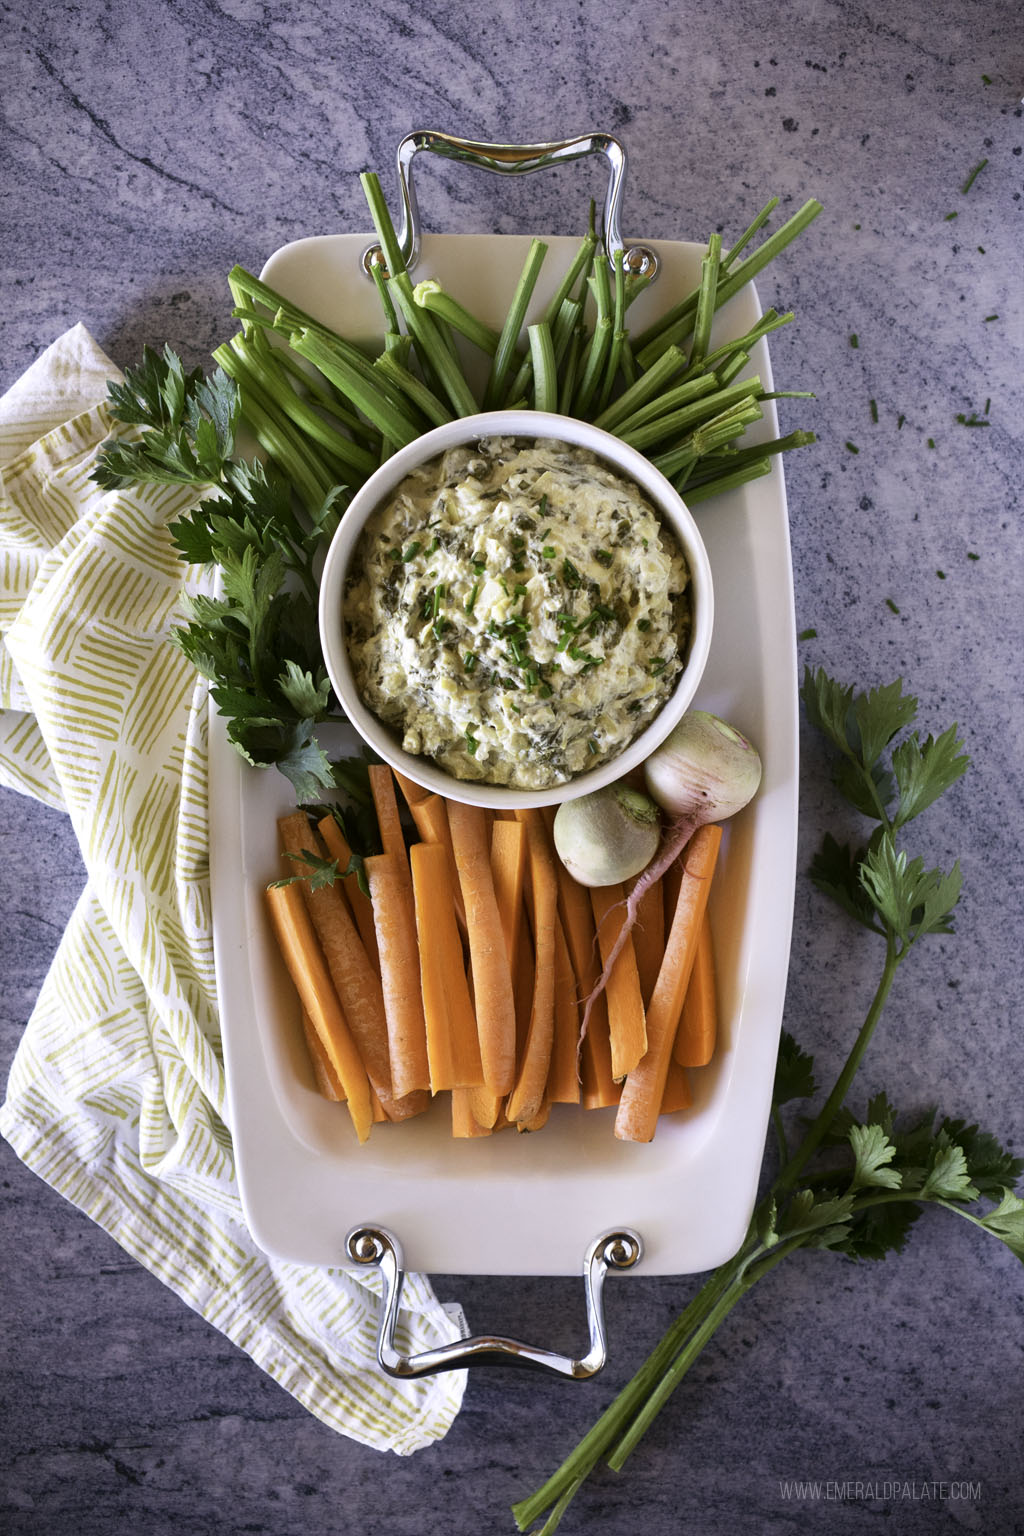 Platter of carrot and celery with a celery root dip